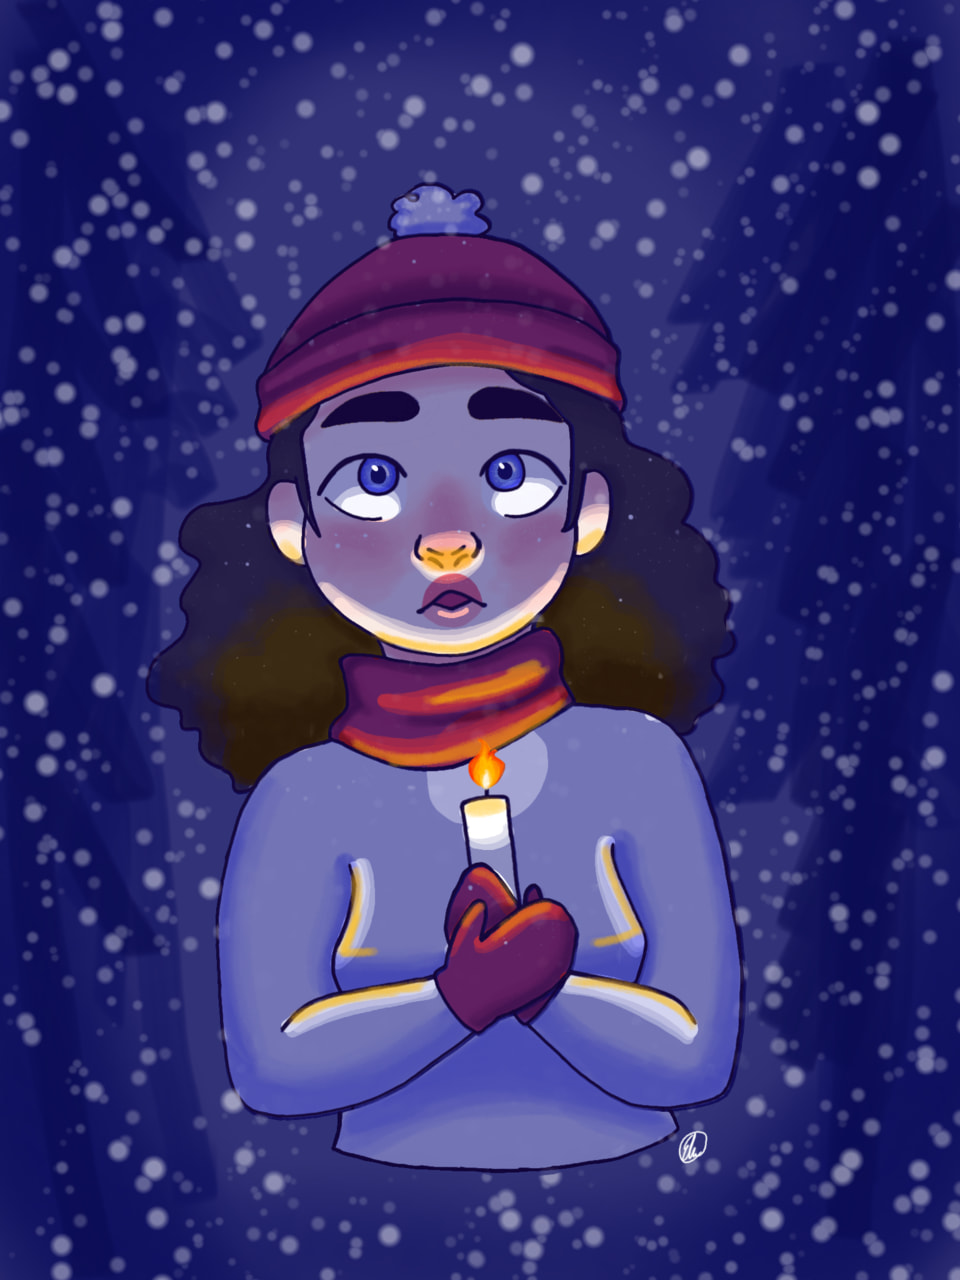 Ur mur gursh. I FINALY finished! I’m super proud of this owo. I’m ready for winter y’all. So many layers...
@sonysketch
#darkchallenge #fridayswithsketch #dark #snow #Candle #lightning #winter #Christmas #ReadyForIt 